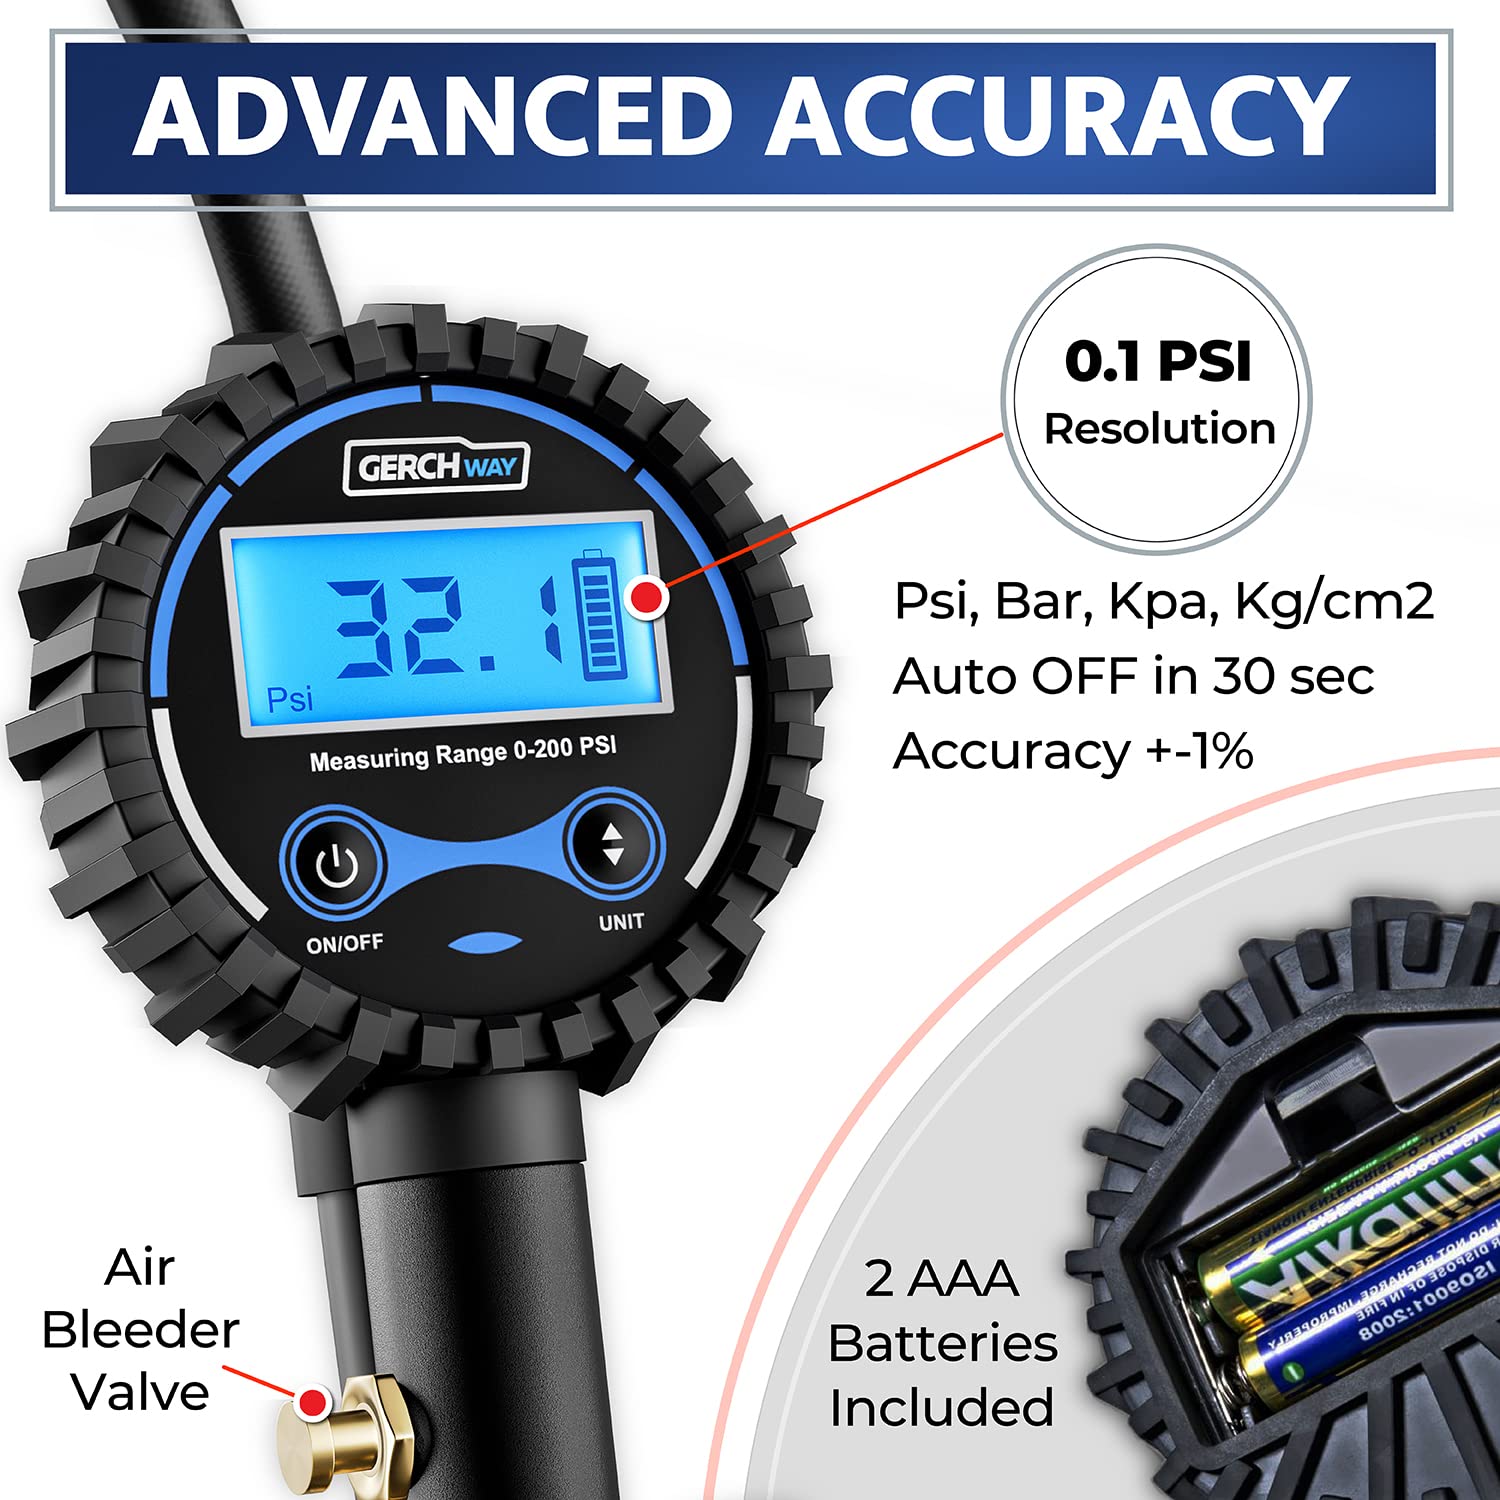 Digital Tire Inflator with Pressure Gauge and Longer Hose, Air Chuck with Gauge for Air Compressor - 200PSI